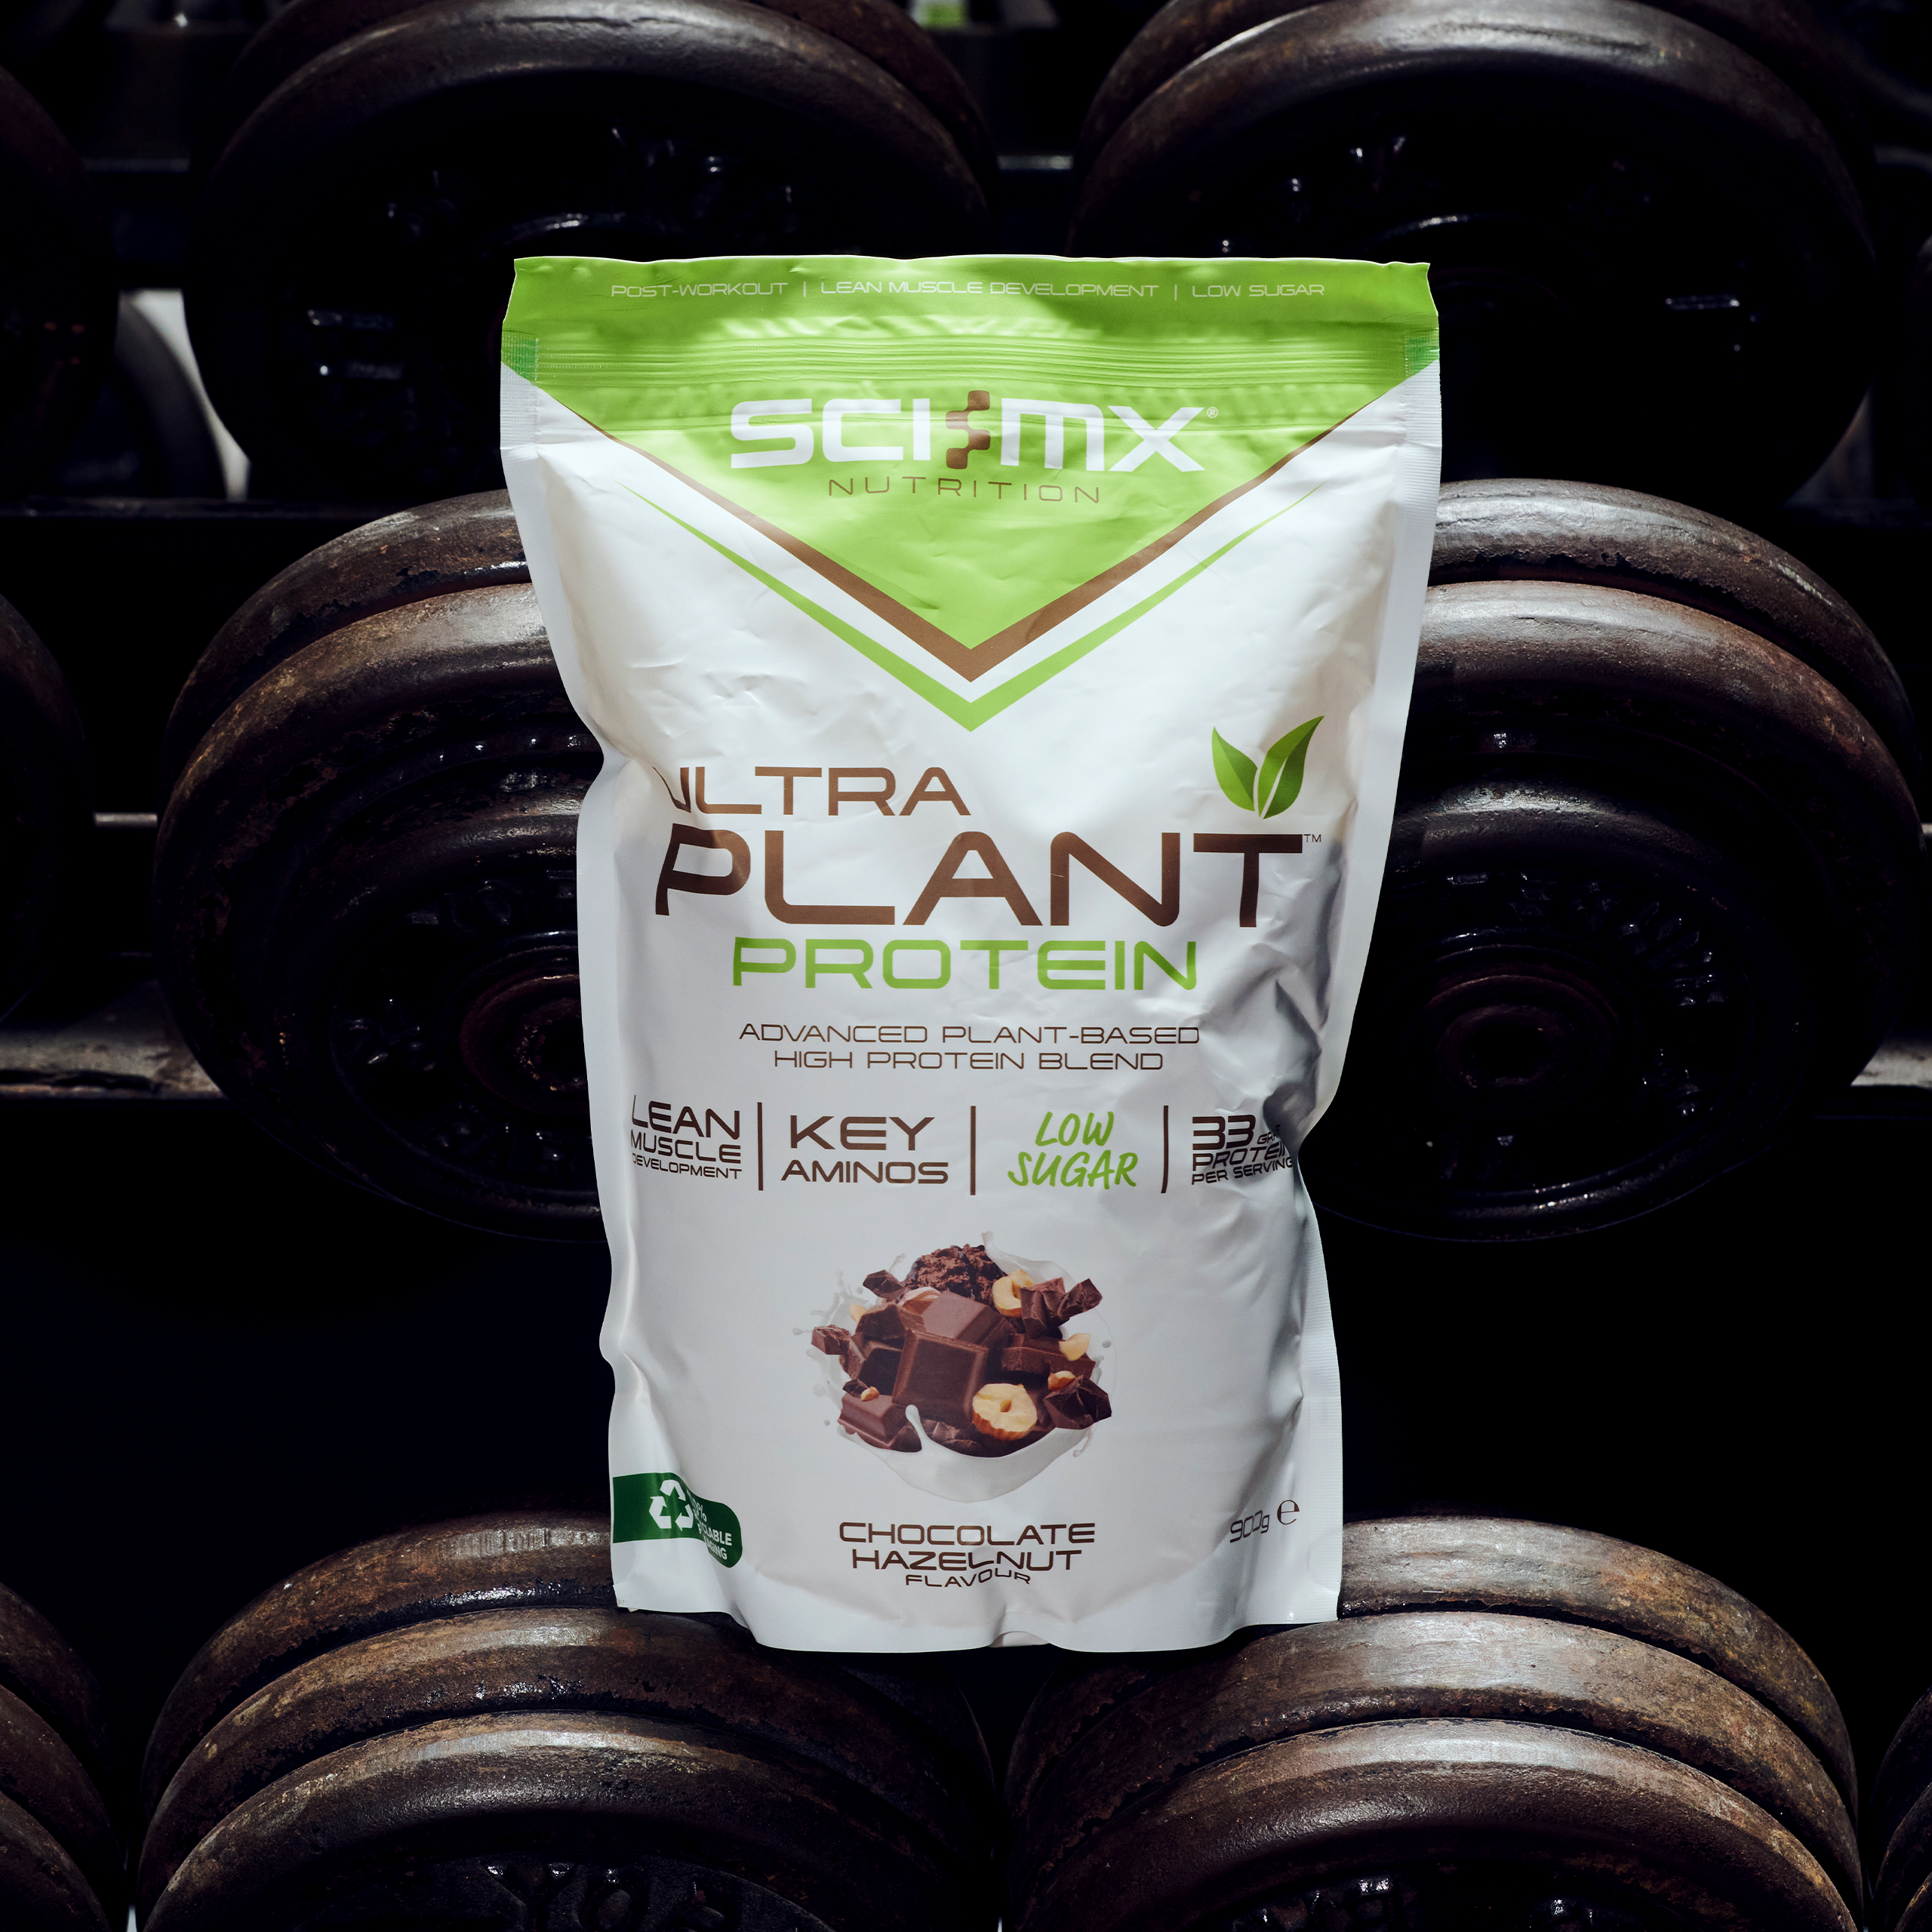 ULTRA PLANT PROTEIN